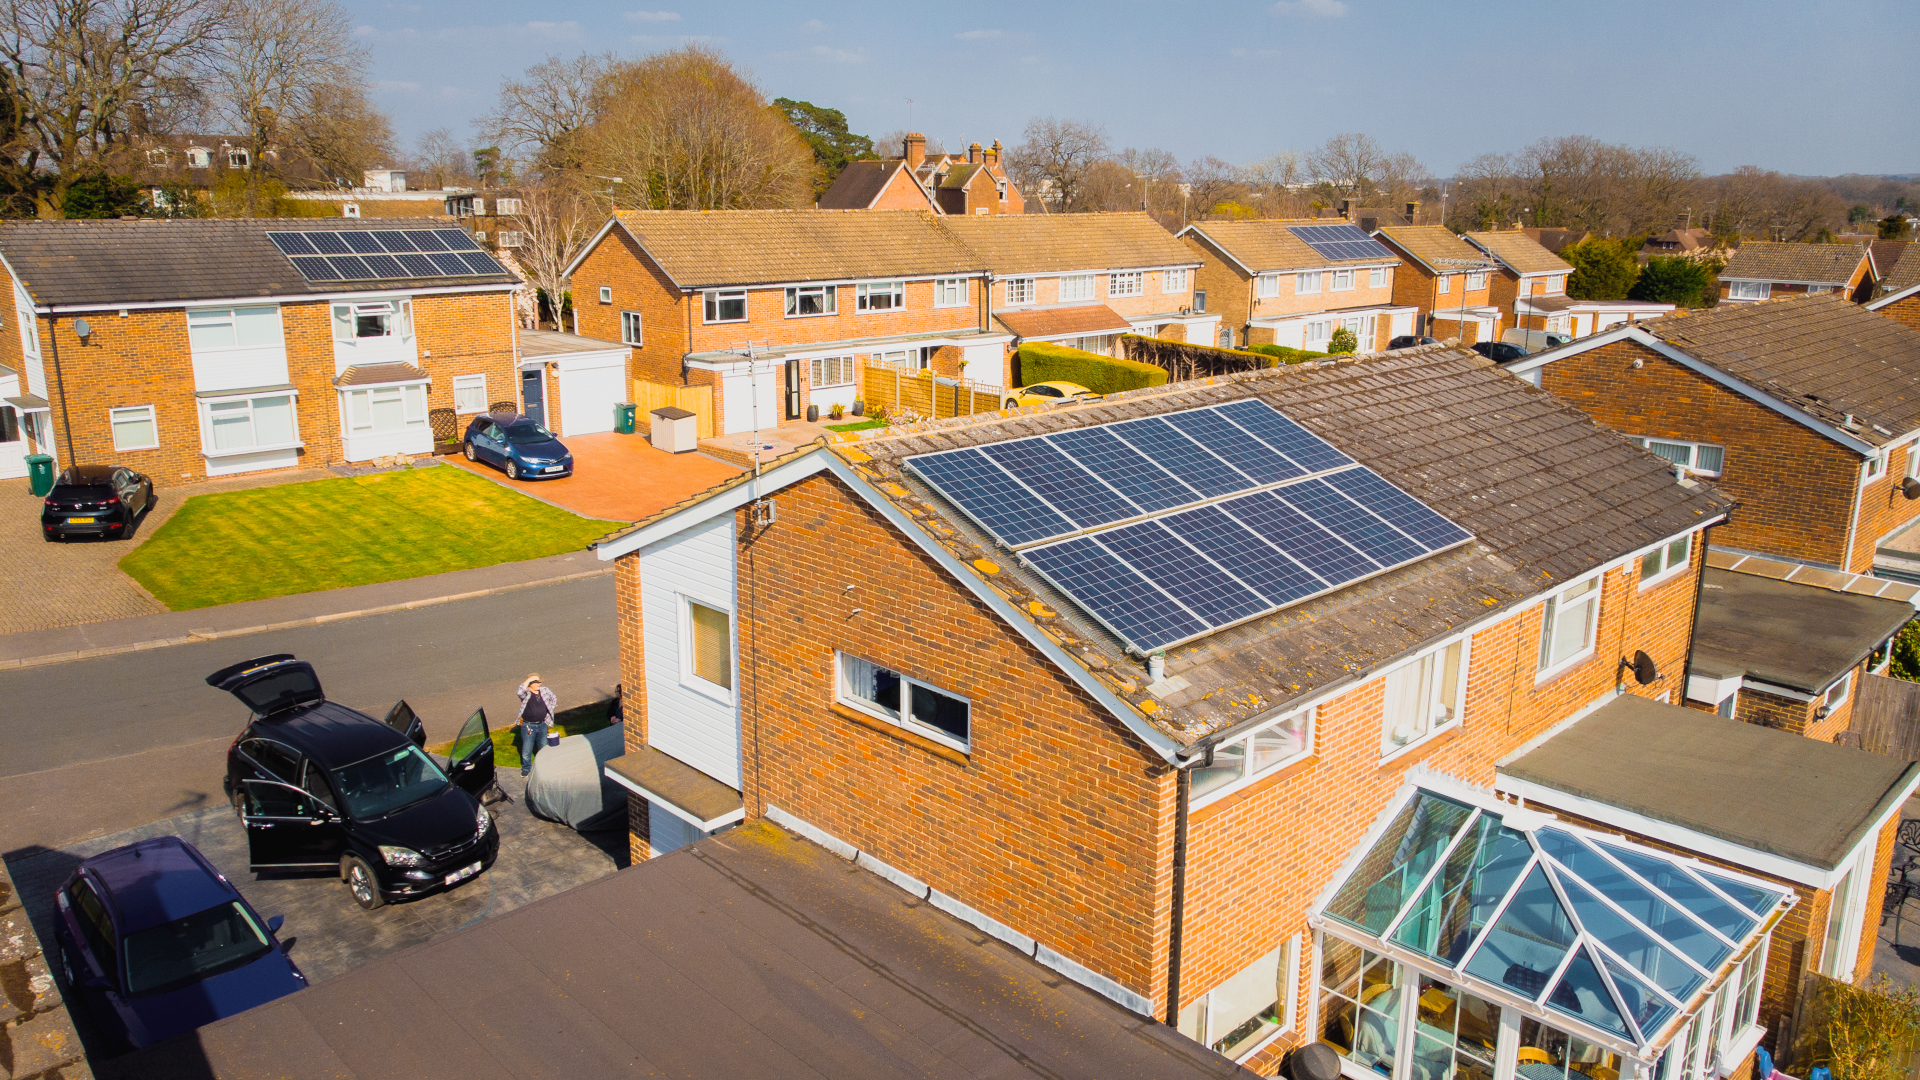 Aerial view, taken by drone, depicting the roof of a semi detached house on a residential street with solar panels installed.